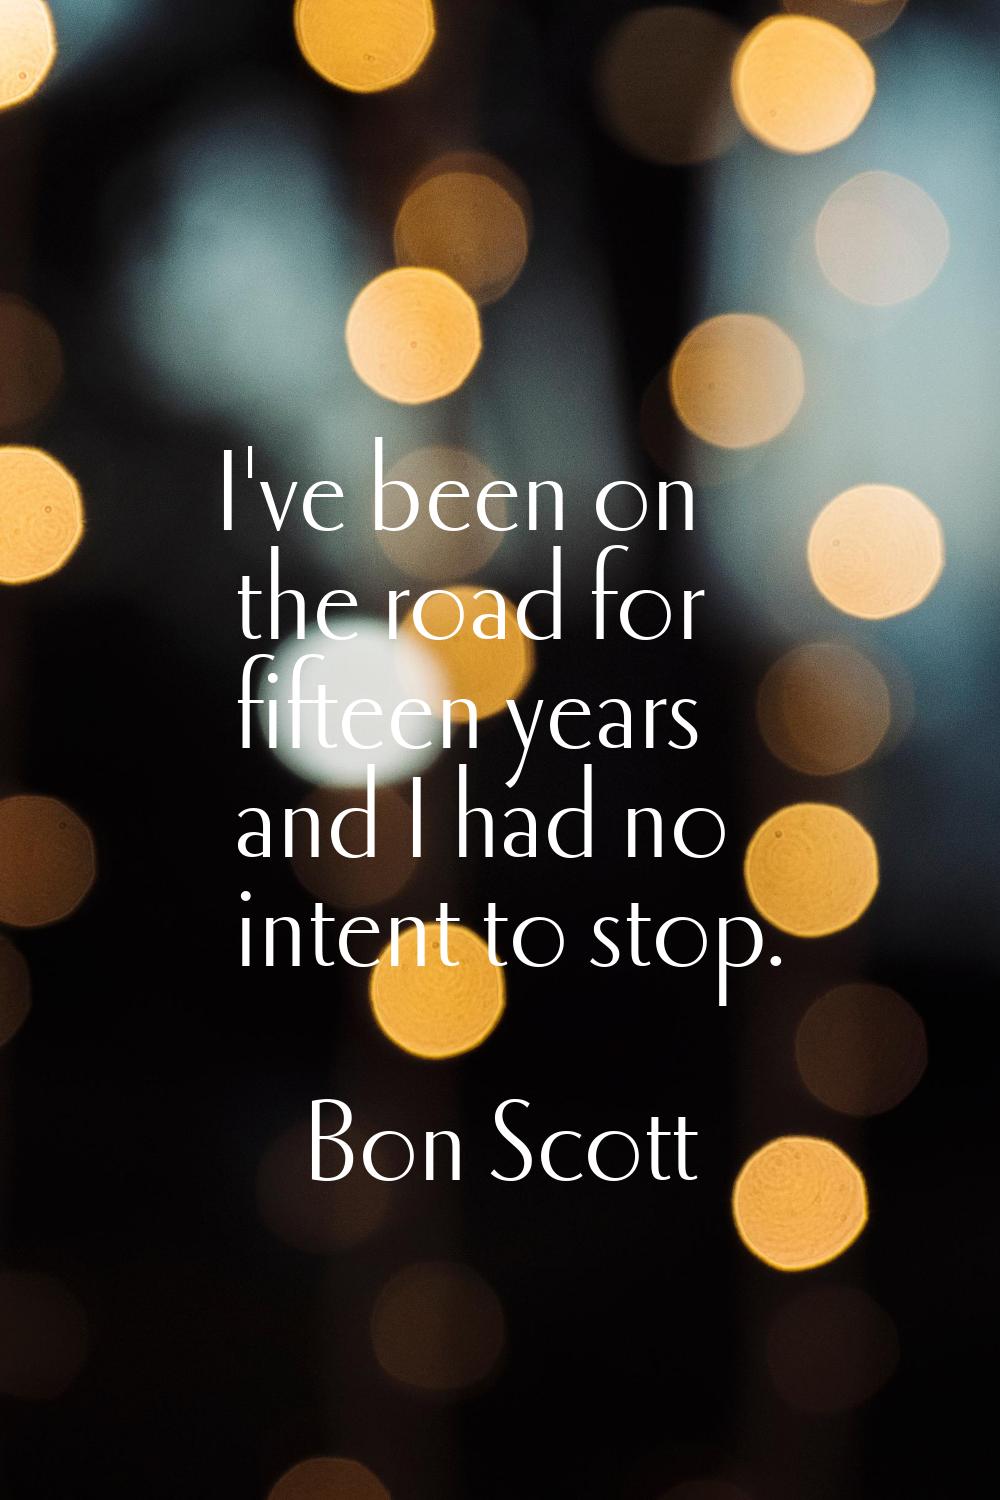 I've been on the road for fifteen years and I had no intent to stop.